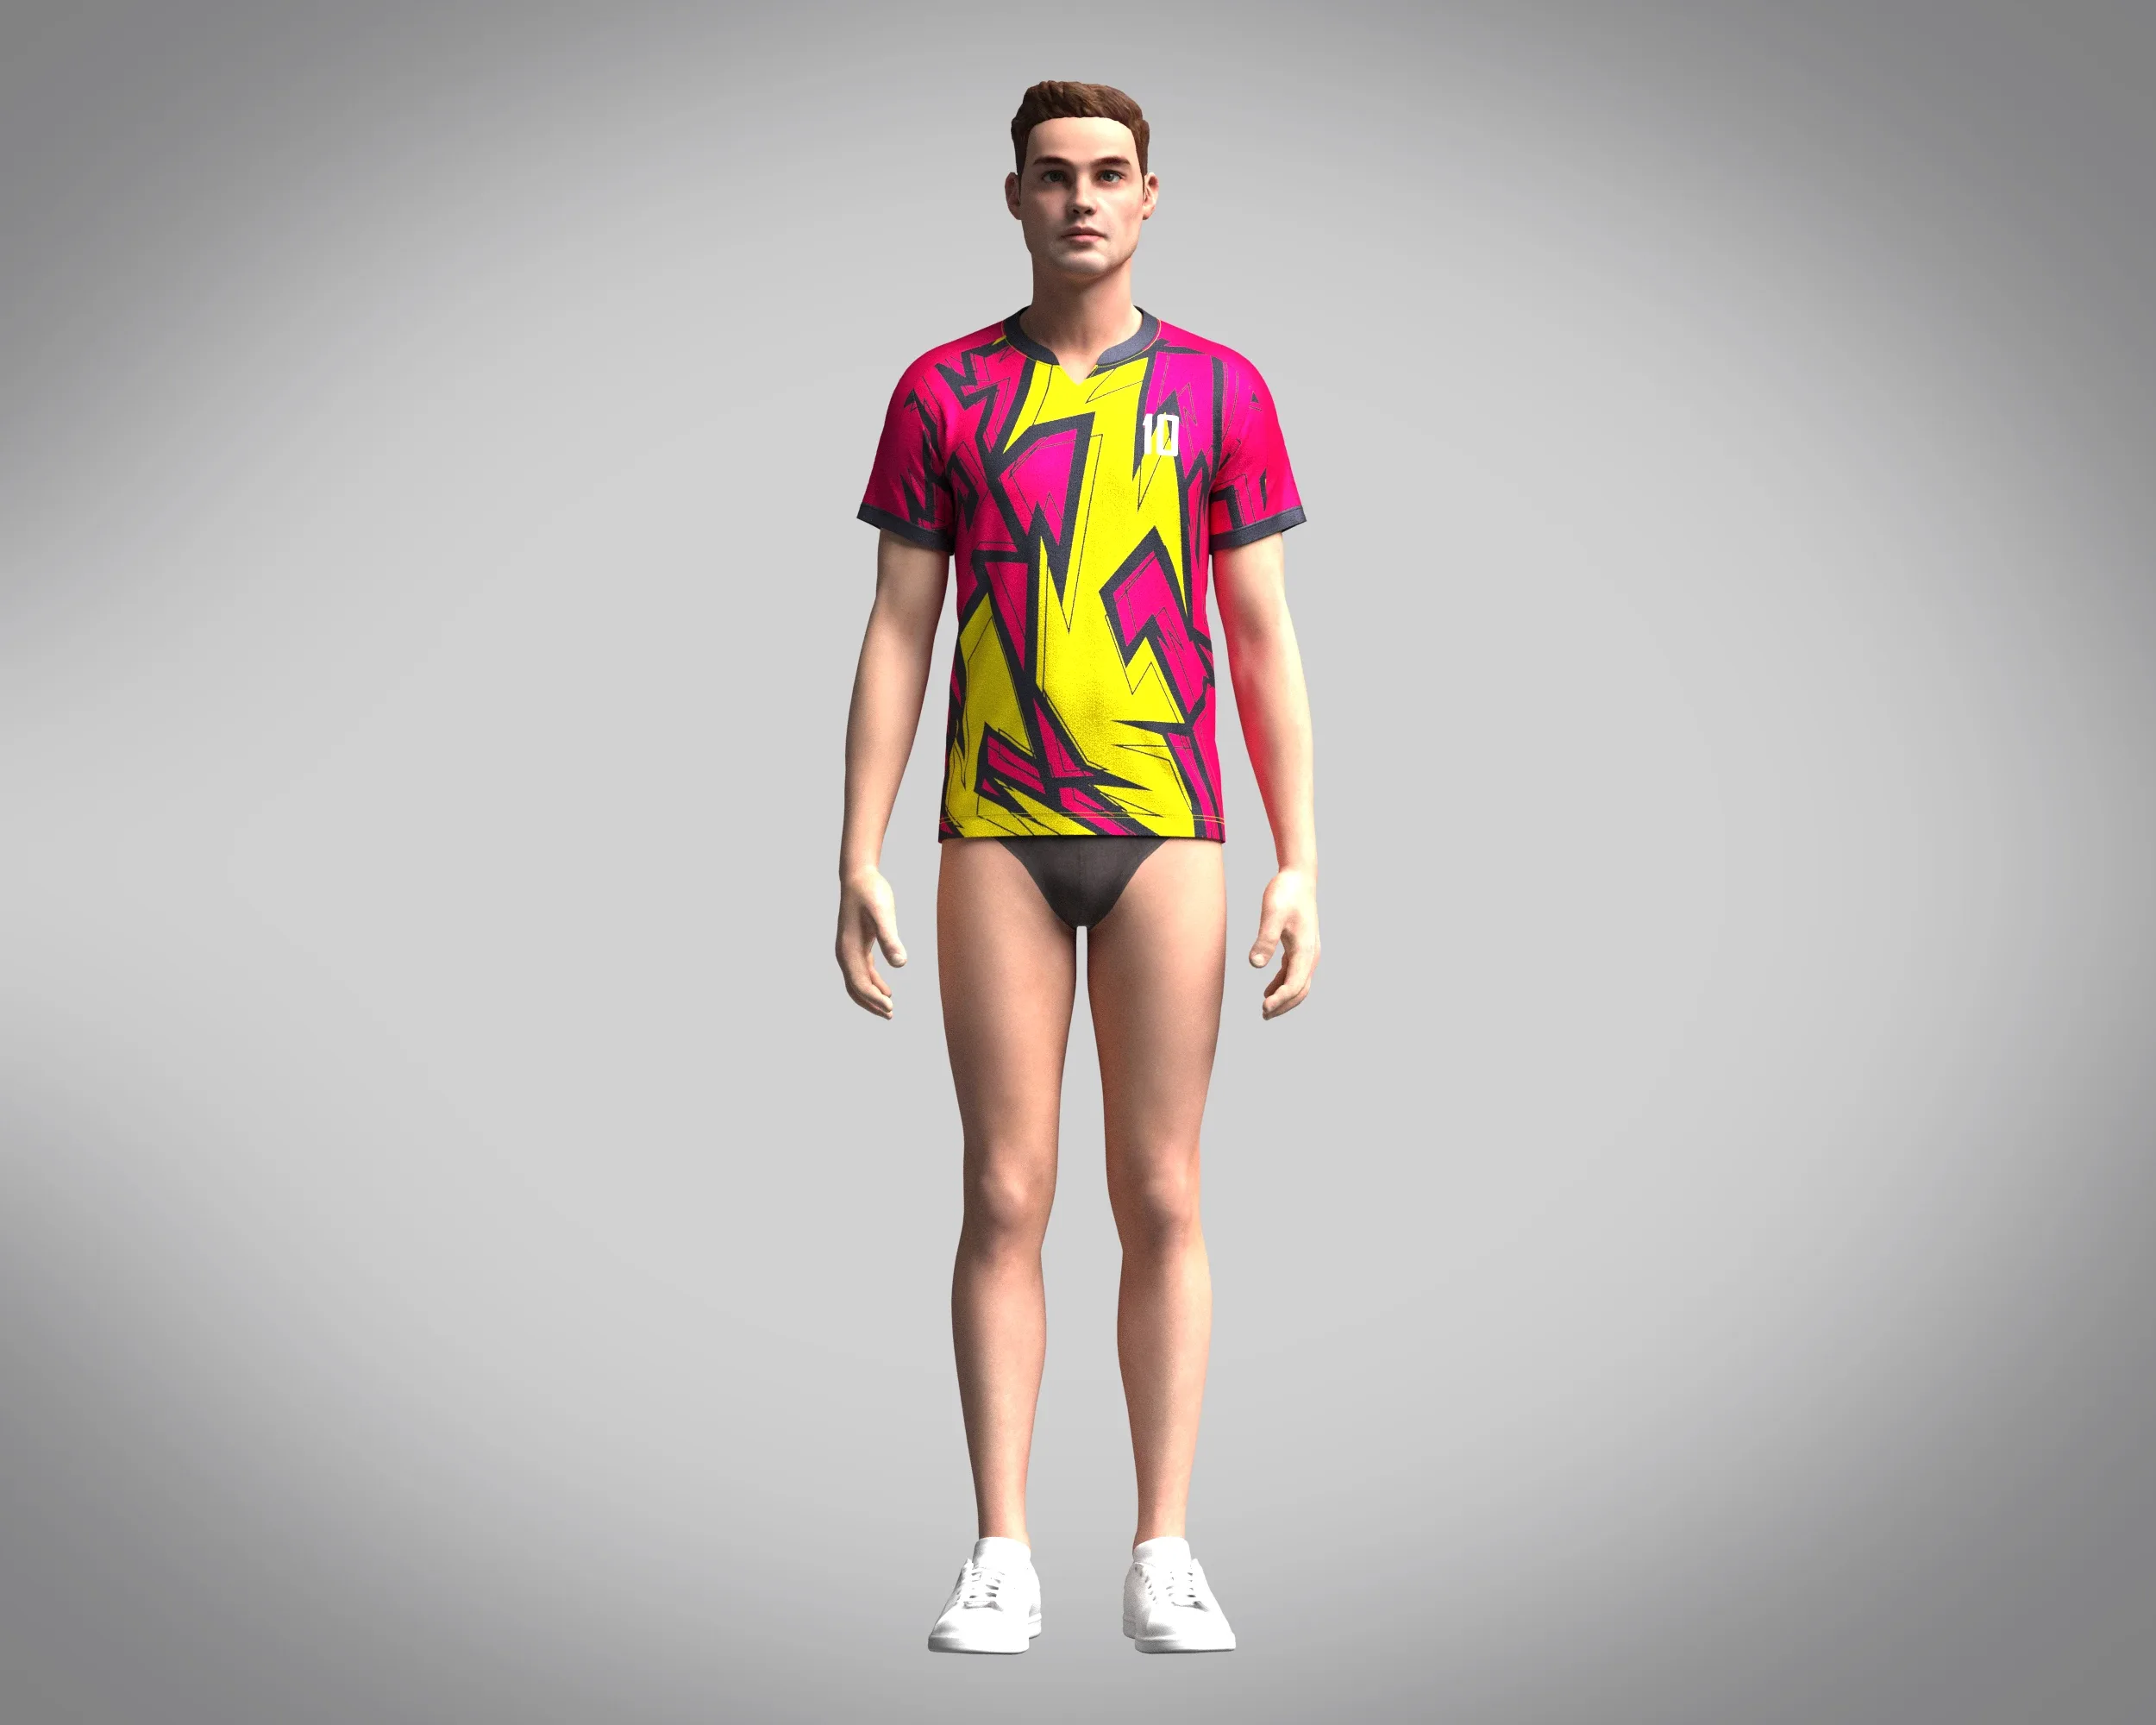 Mens Soccer Hot Pink and Yellow Jersey Player-10 | Marvelous / Clo3d / obj / fbx